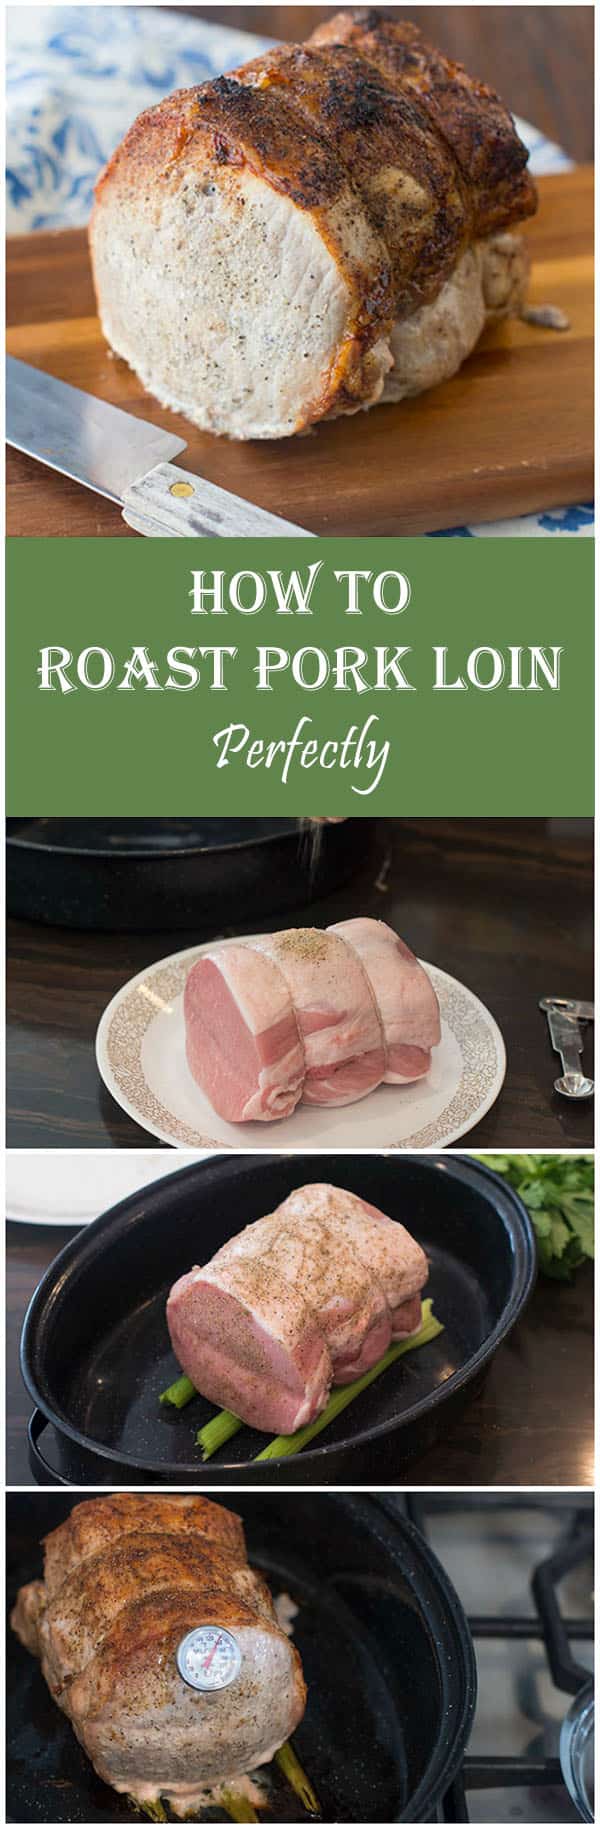 How To Roast Pork Loin Perfectly